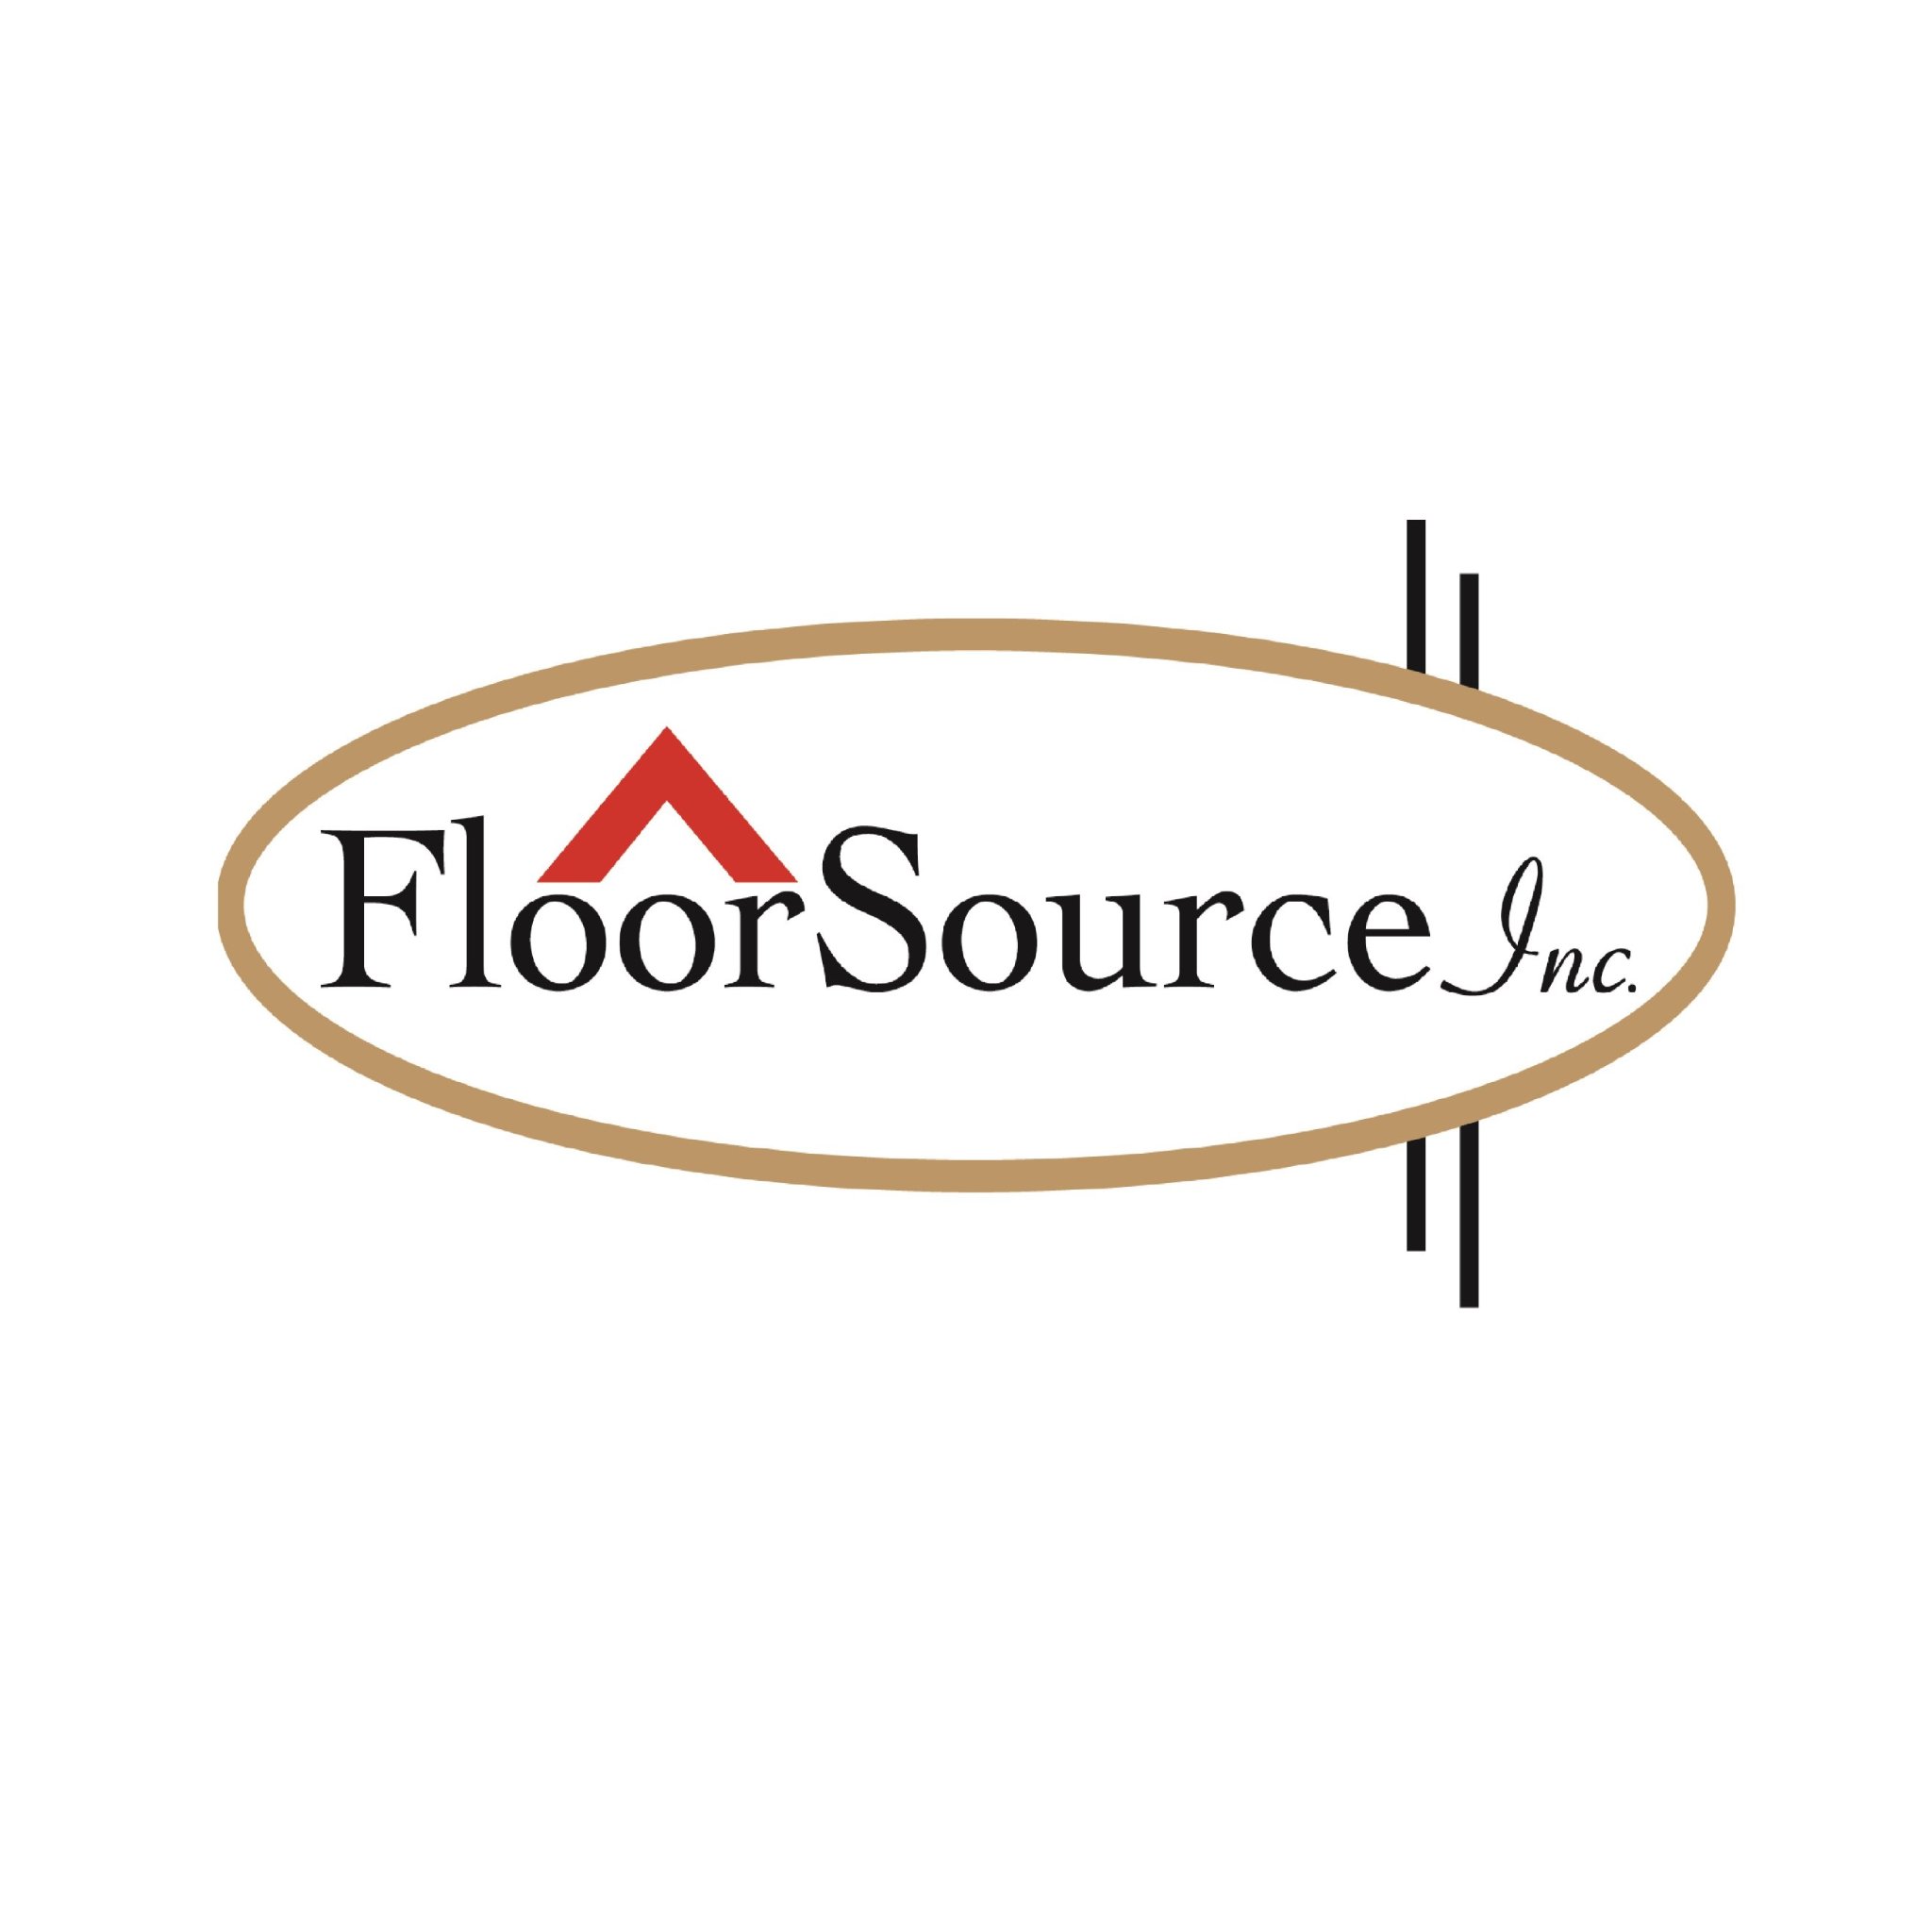 High quality flooring for residential and commercial needs, with an experienced and knowledgeable sales staff to assist you every step of the way.